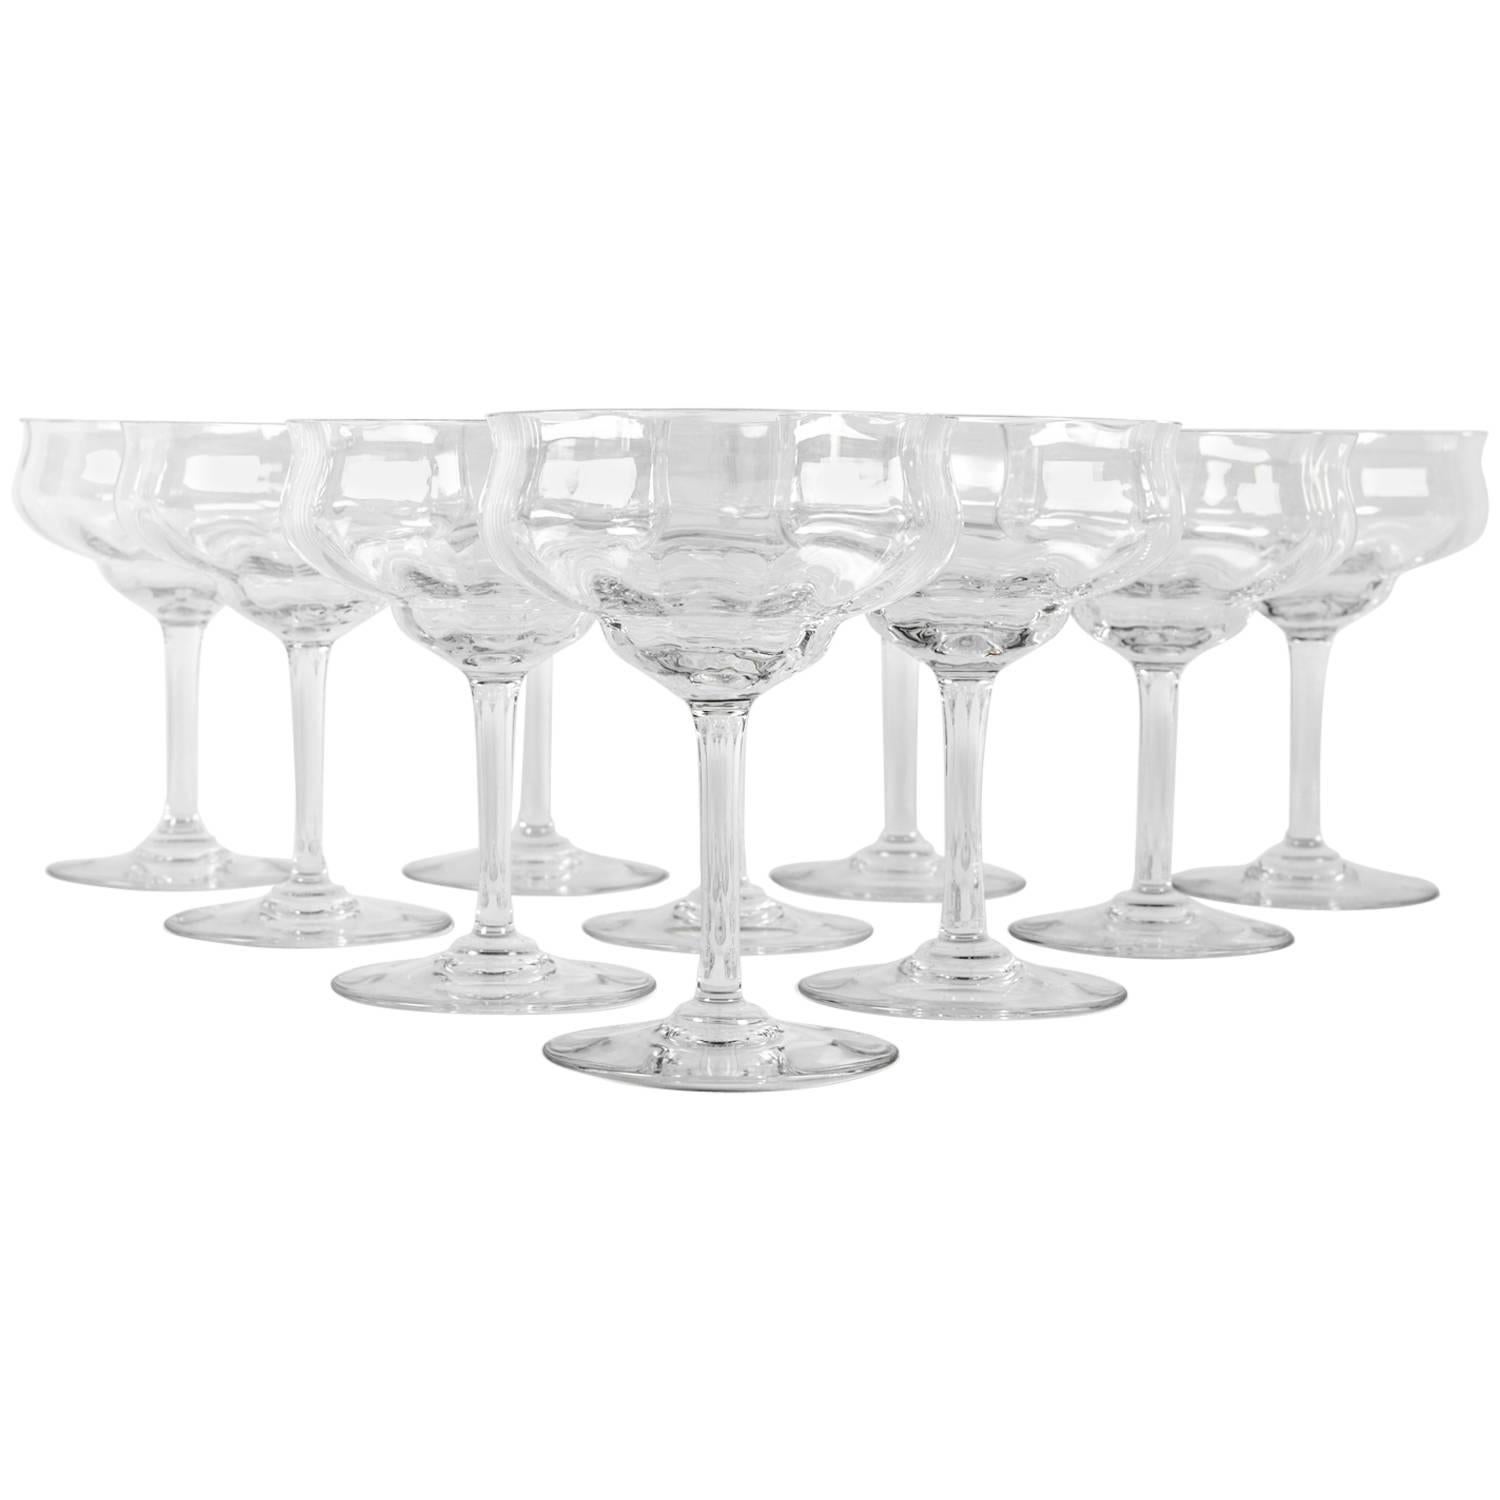 Vintage Set of Eight Baccarat Champagne or Drinks Coupe